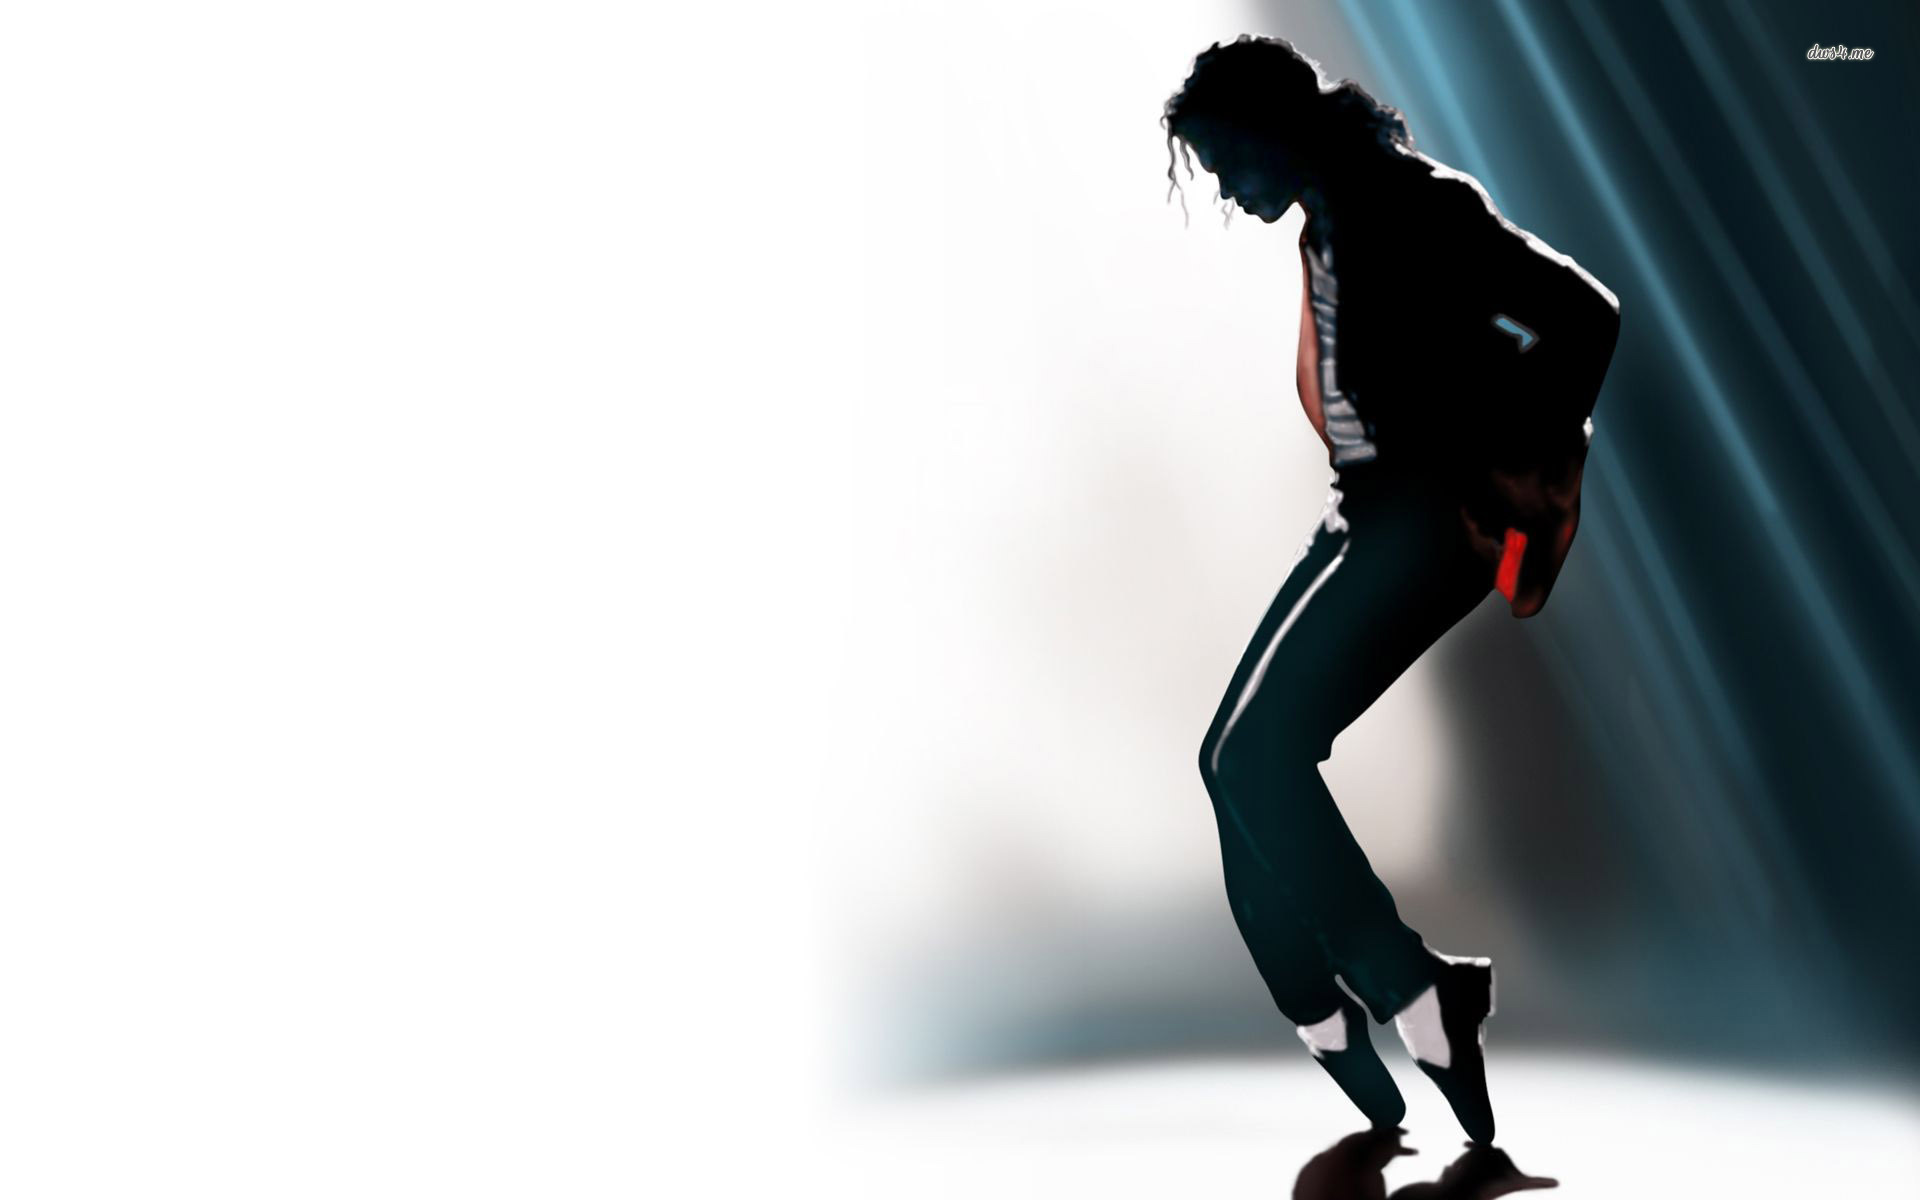 michael jackson images wallpapers #11